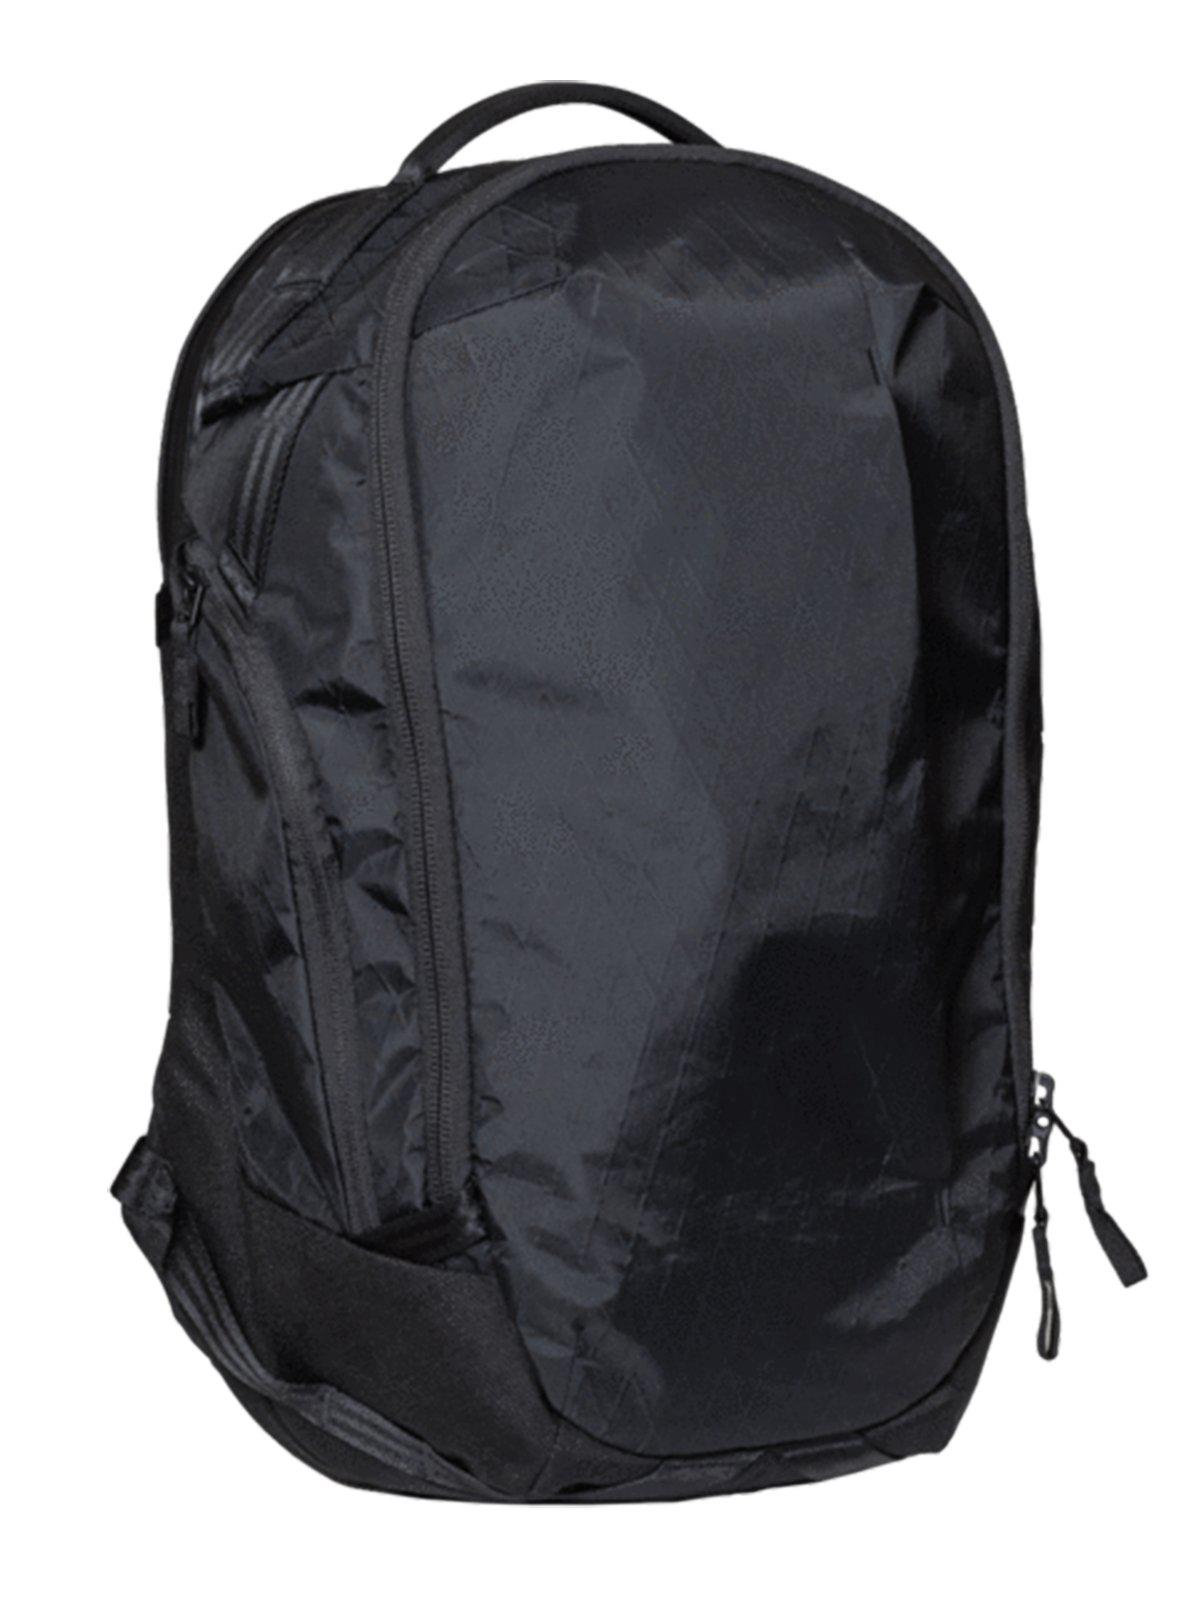 Able Carry Max Backpack Dark Tarmac Black